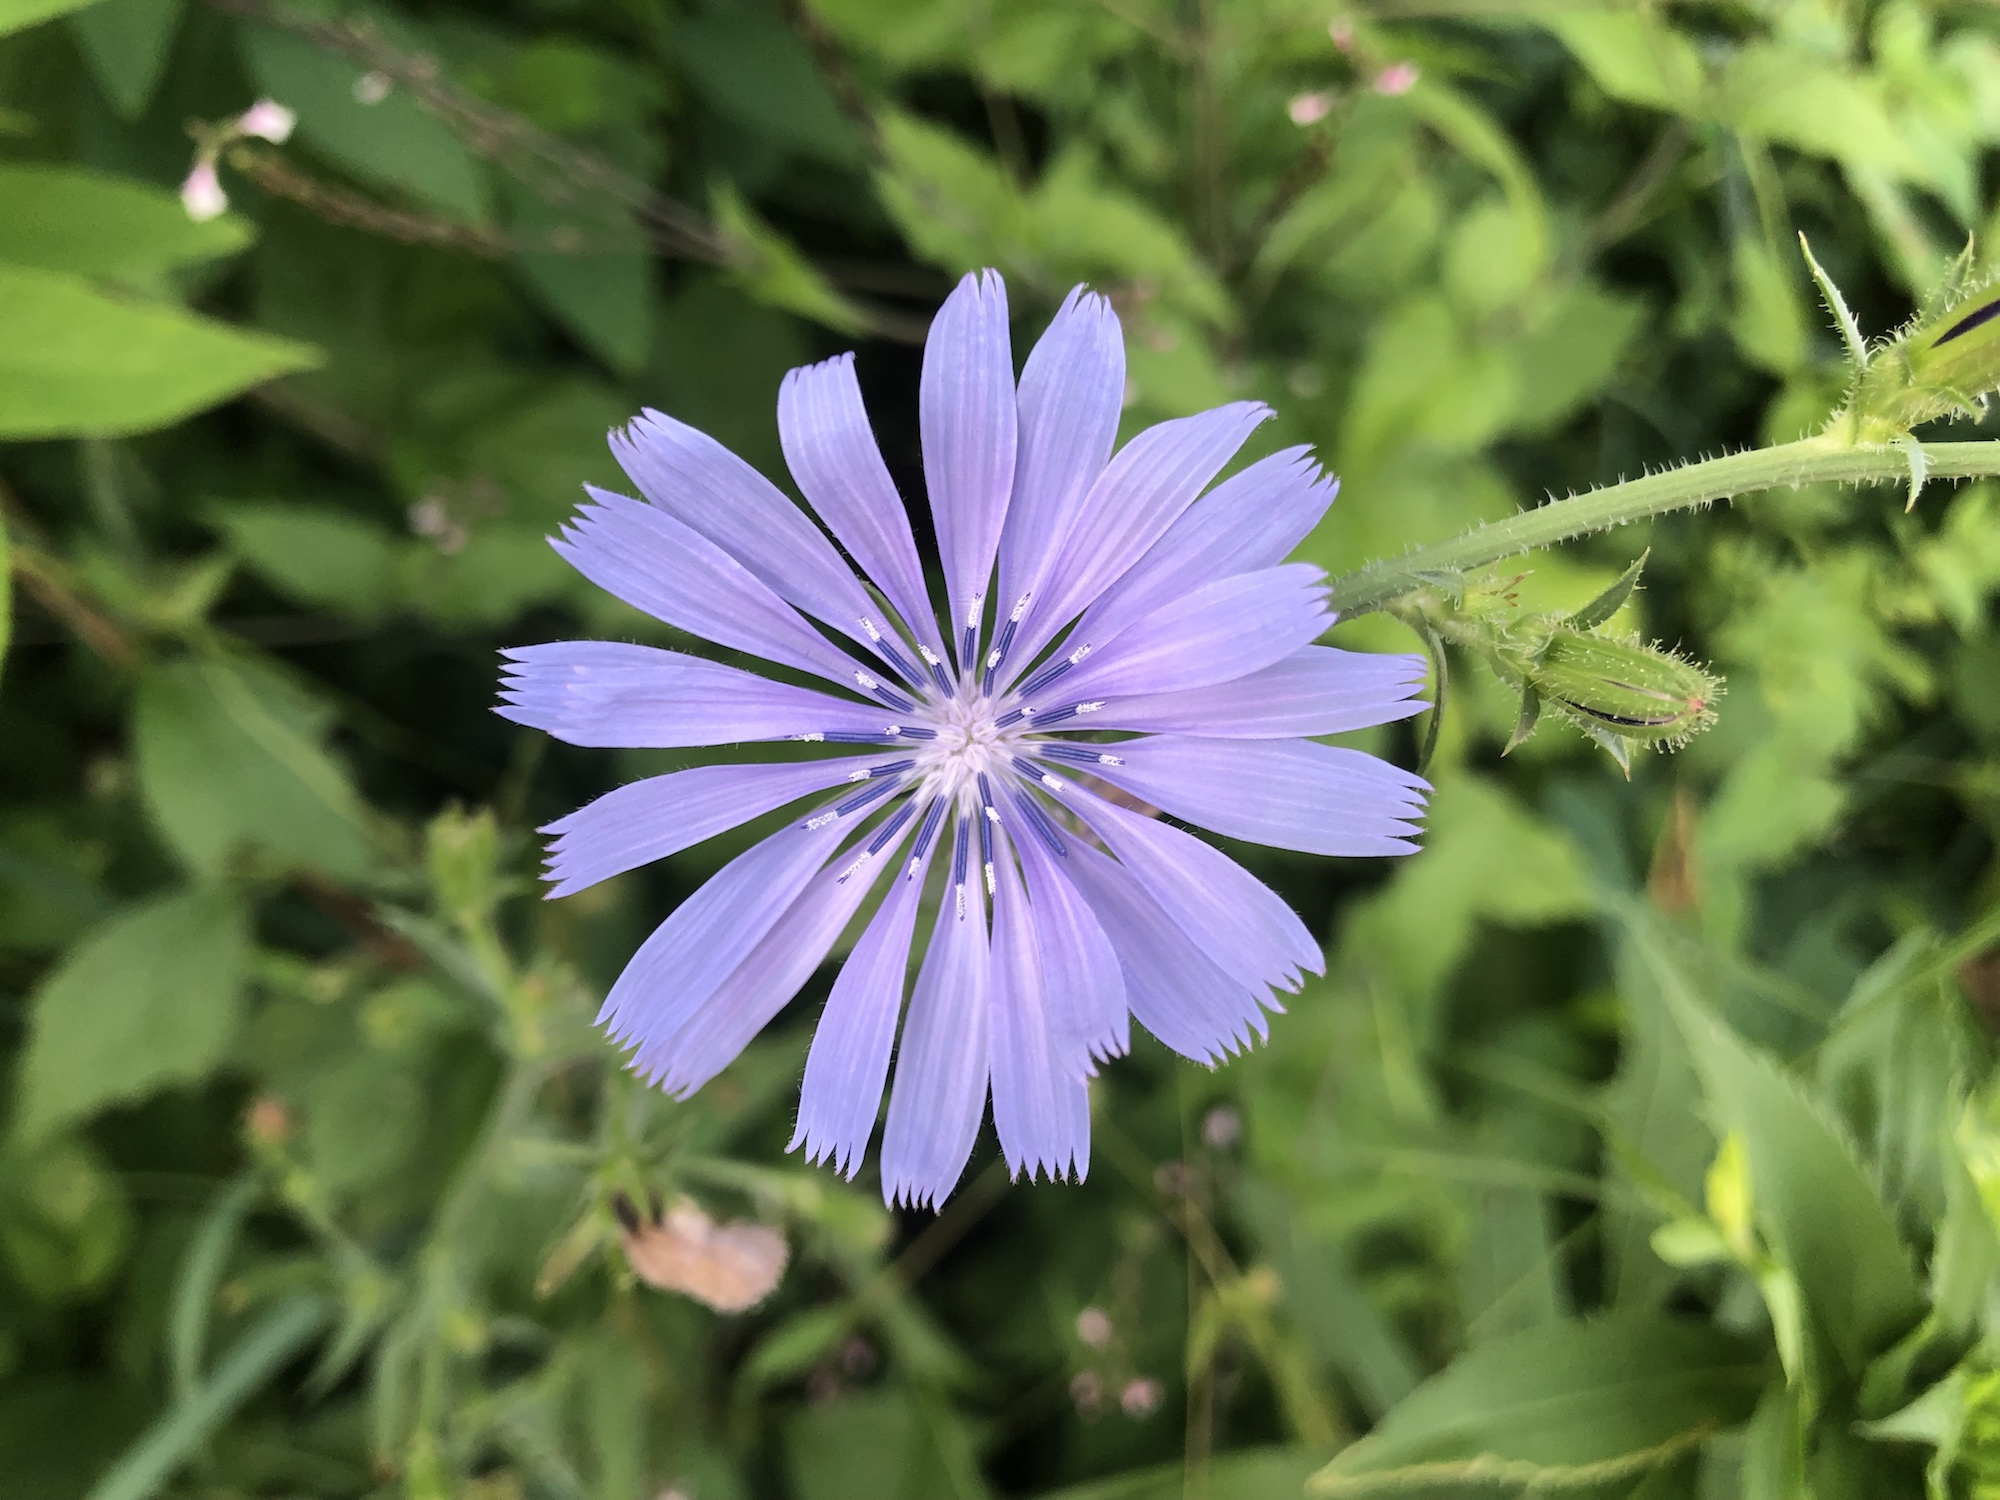 Chicory in Marion Dunn Prairie in Madison, Wisconsin on July 24, 2019.